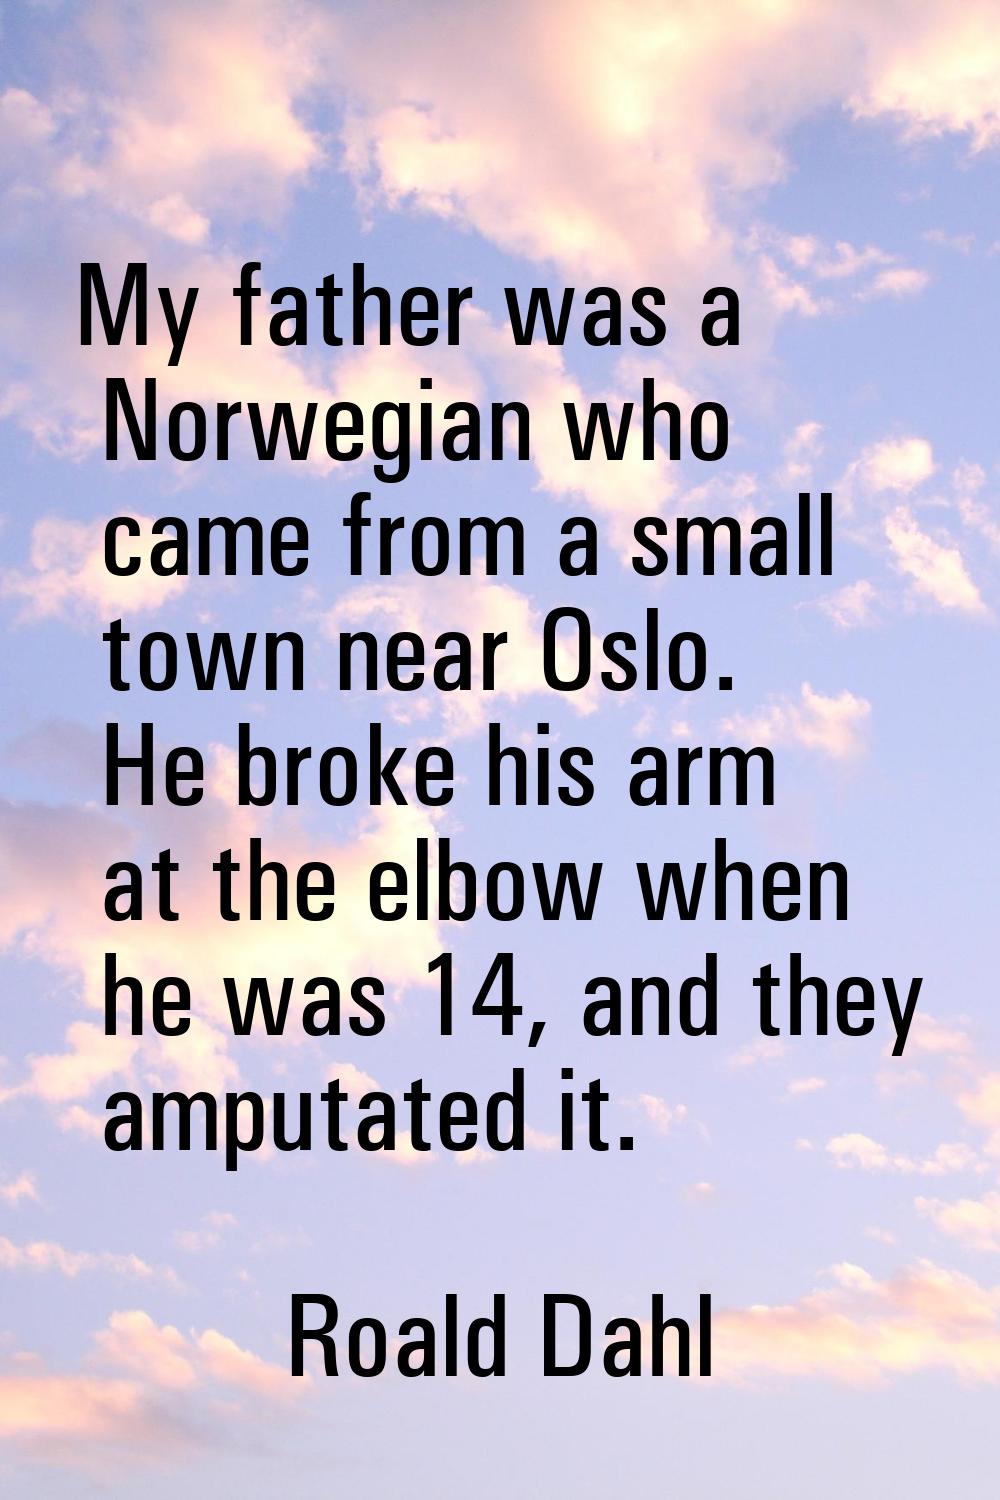 My father was a Norwegian who came from a small town near Oslo. He broke his arm at the elbow when 